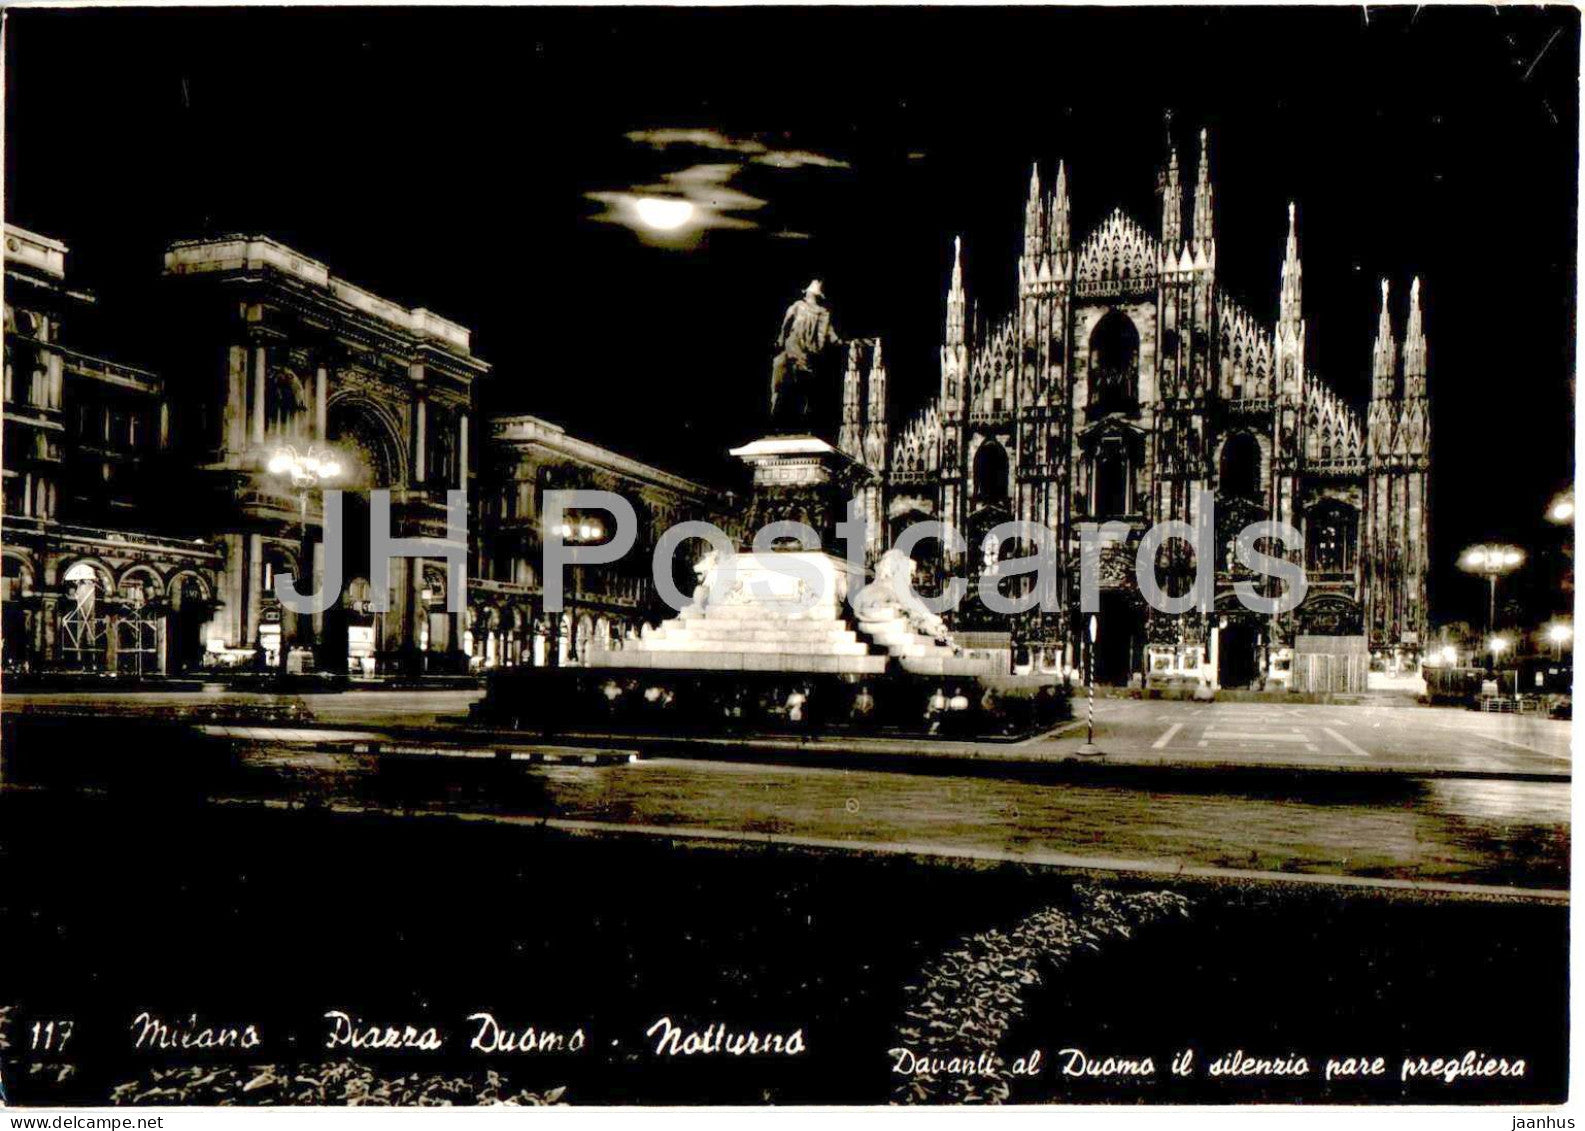 Milano - Milan - Piazza Duomo - Notturno - Cathedral square - 117 - old postcard - 1955 - Italy - used - JH Postcards